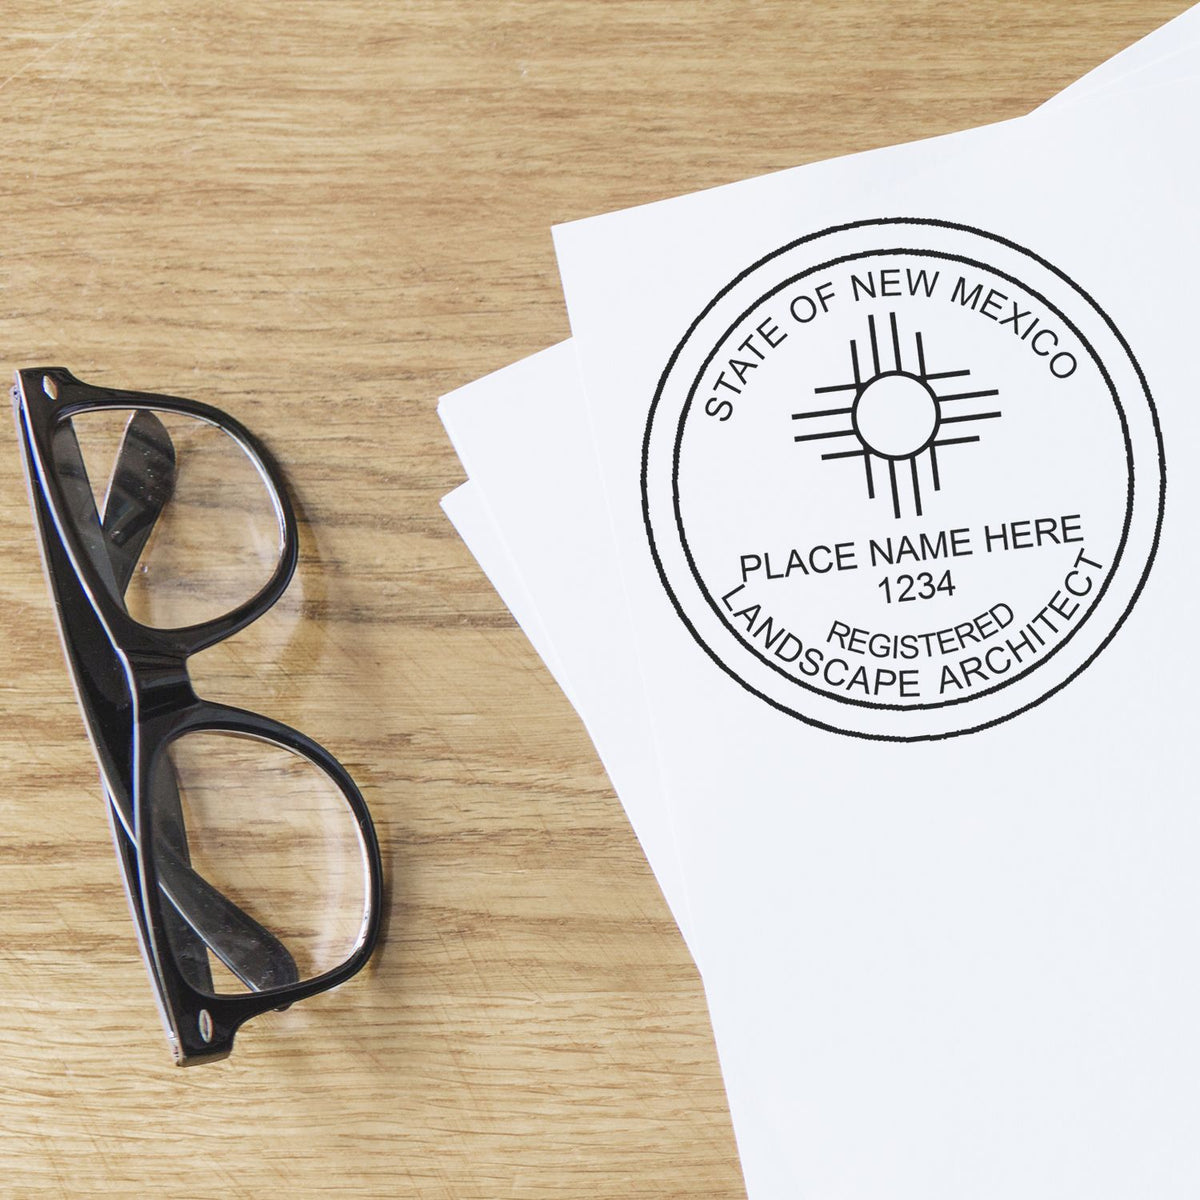 This paper is stamped with a sample imprint of the Premium MaxLight Pre-Inked New Mexico Landscape Architectural Stamp, signifying its quality and reliability.